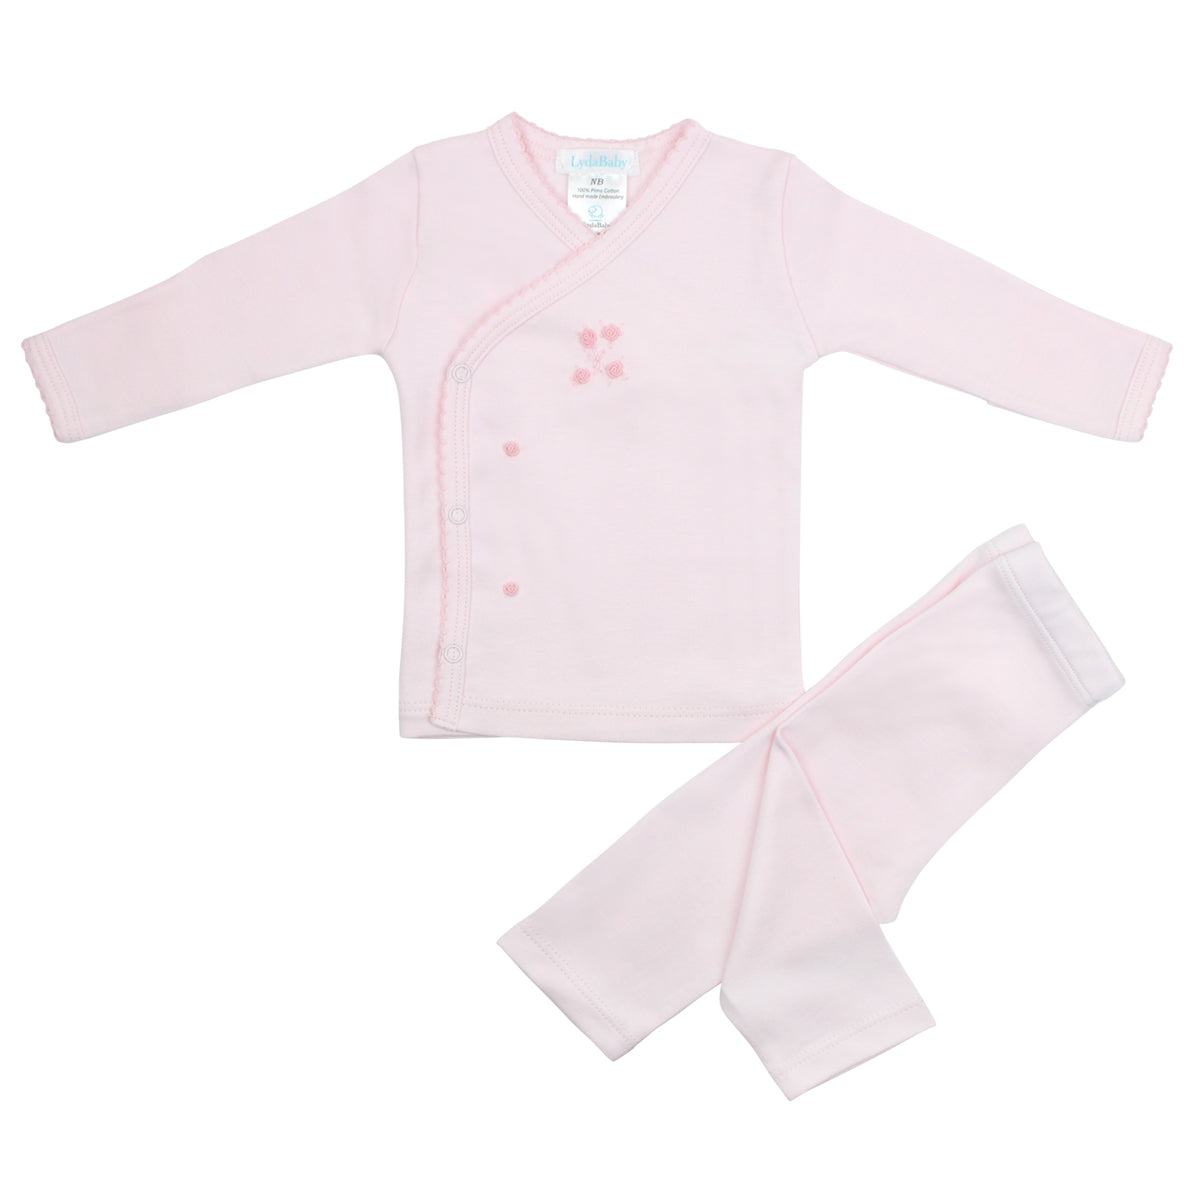 PIMA COTTON-SWEET ROSES PINK SET 2 PICES